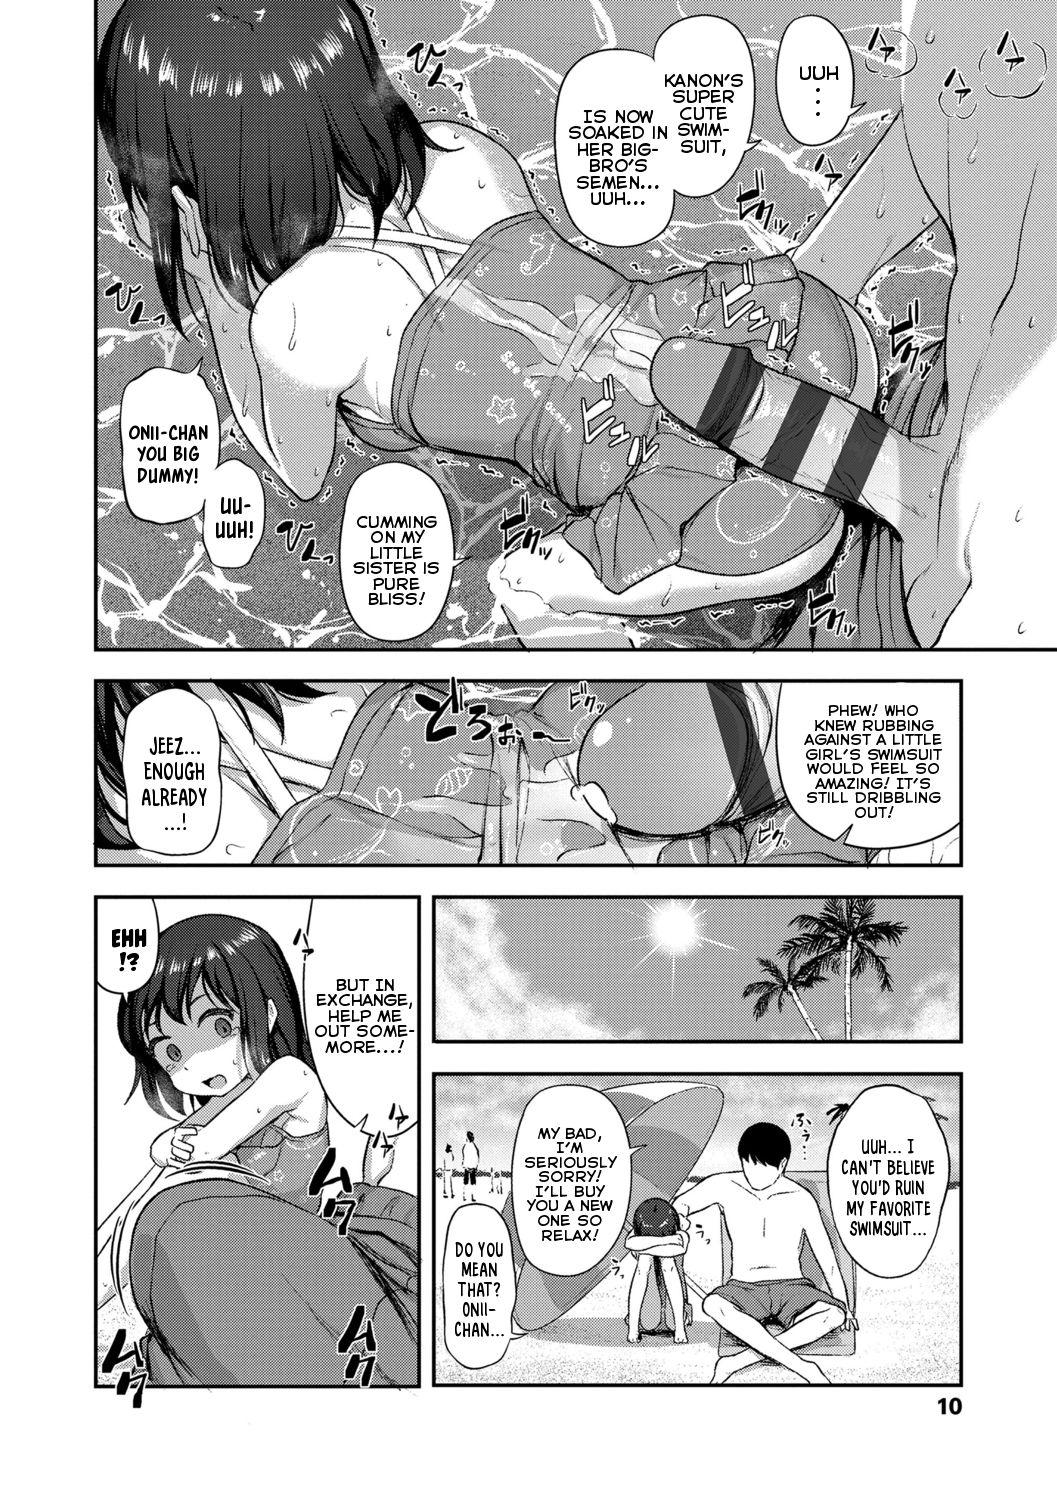 Nudity [Hayake] Imouto no Hadaka o Mite Koufun Suru nante Hen na Onii-chan | What Kind of Weirdo Onii-chan Gets Excited From Seeing His Little Sister Naked? [English] [Mistvern + Shippoyasha] [Digital] Consolo - Page 12